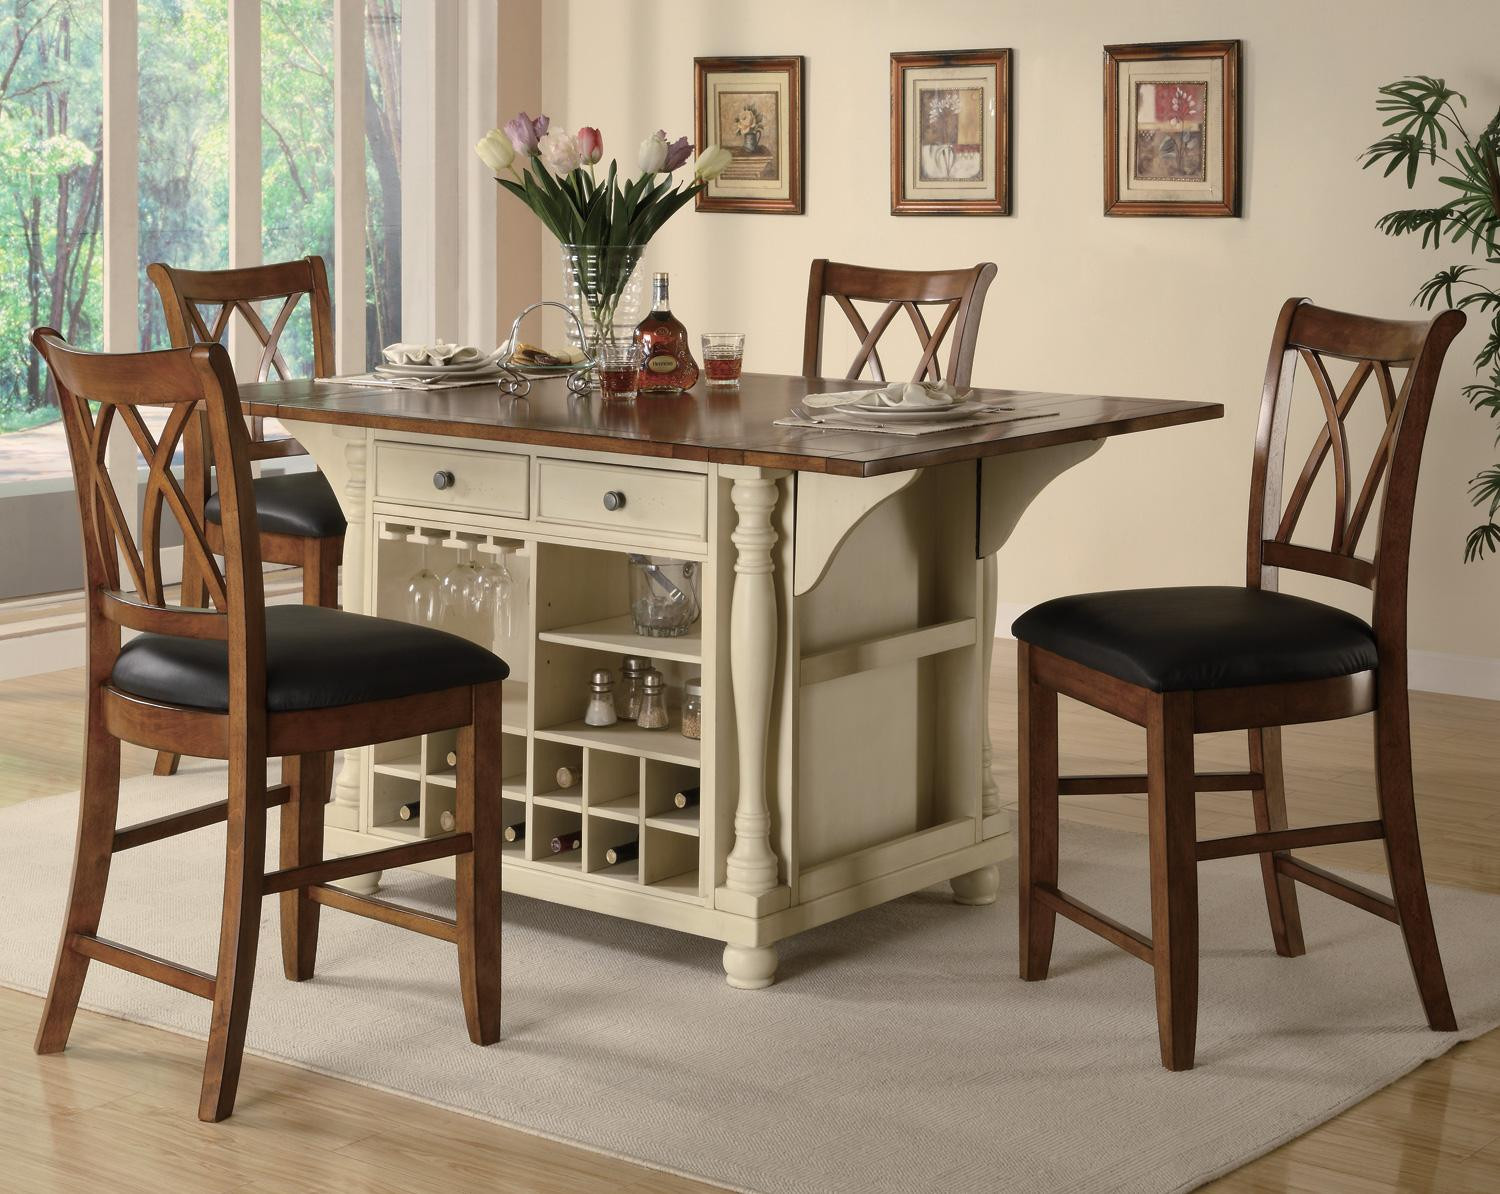 Counter Height Kitchen Sets
 Counter Height Kitchen Tables for Special Dining Room